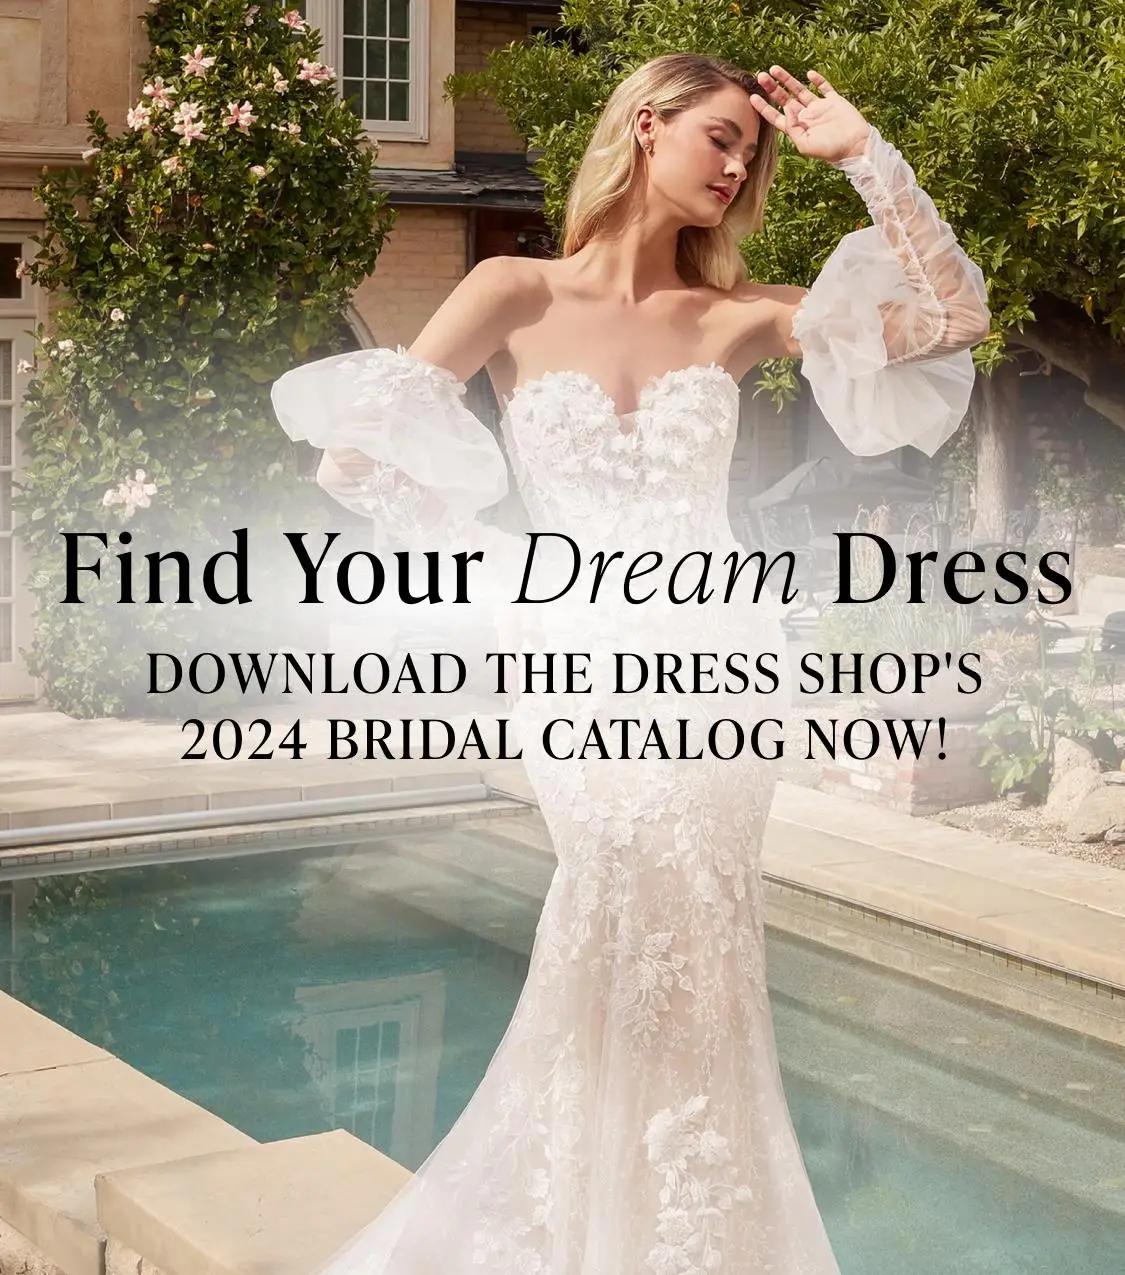 Find Your Dream Dress Mobile Banner